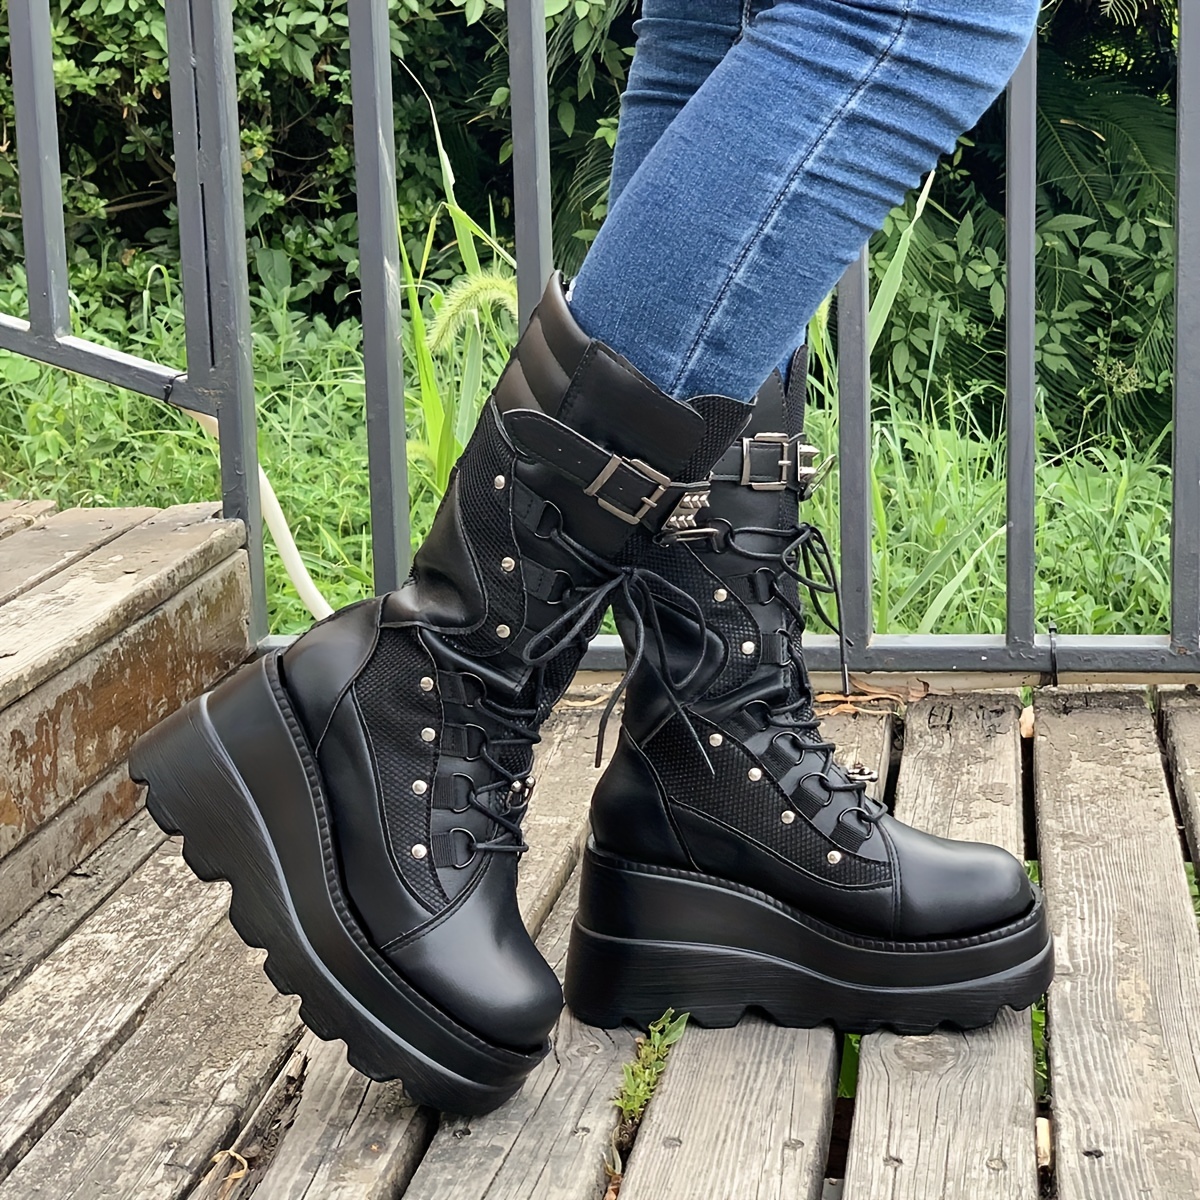 Womens Gothic Platform Wedge Heel Motorcycle Combat Boots Faux